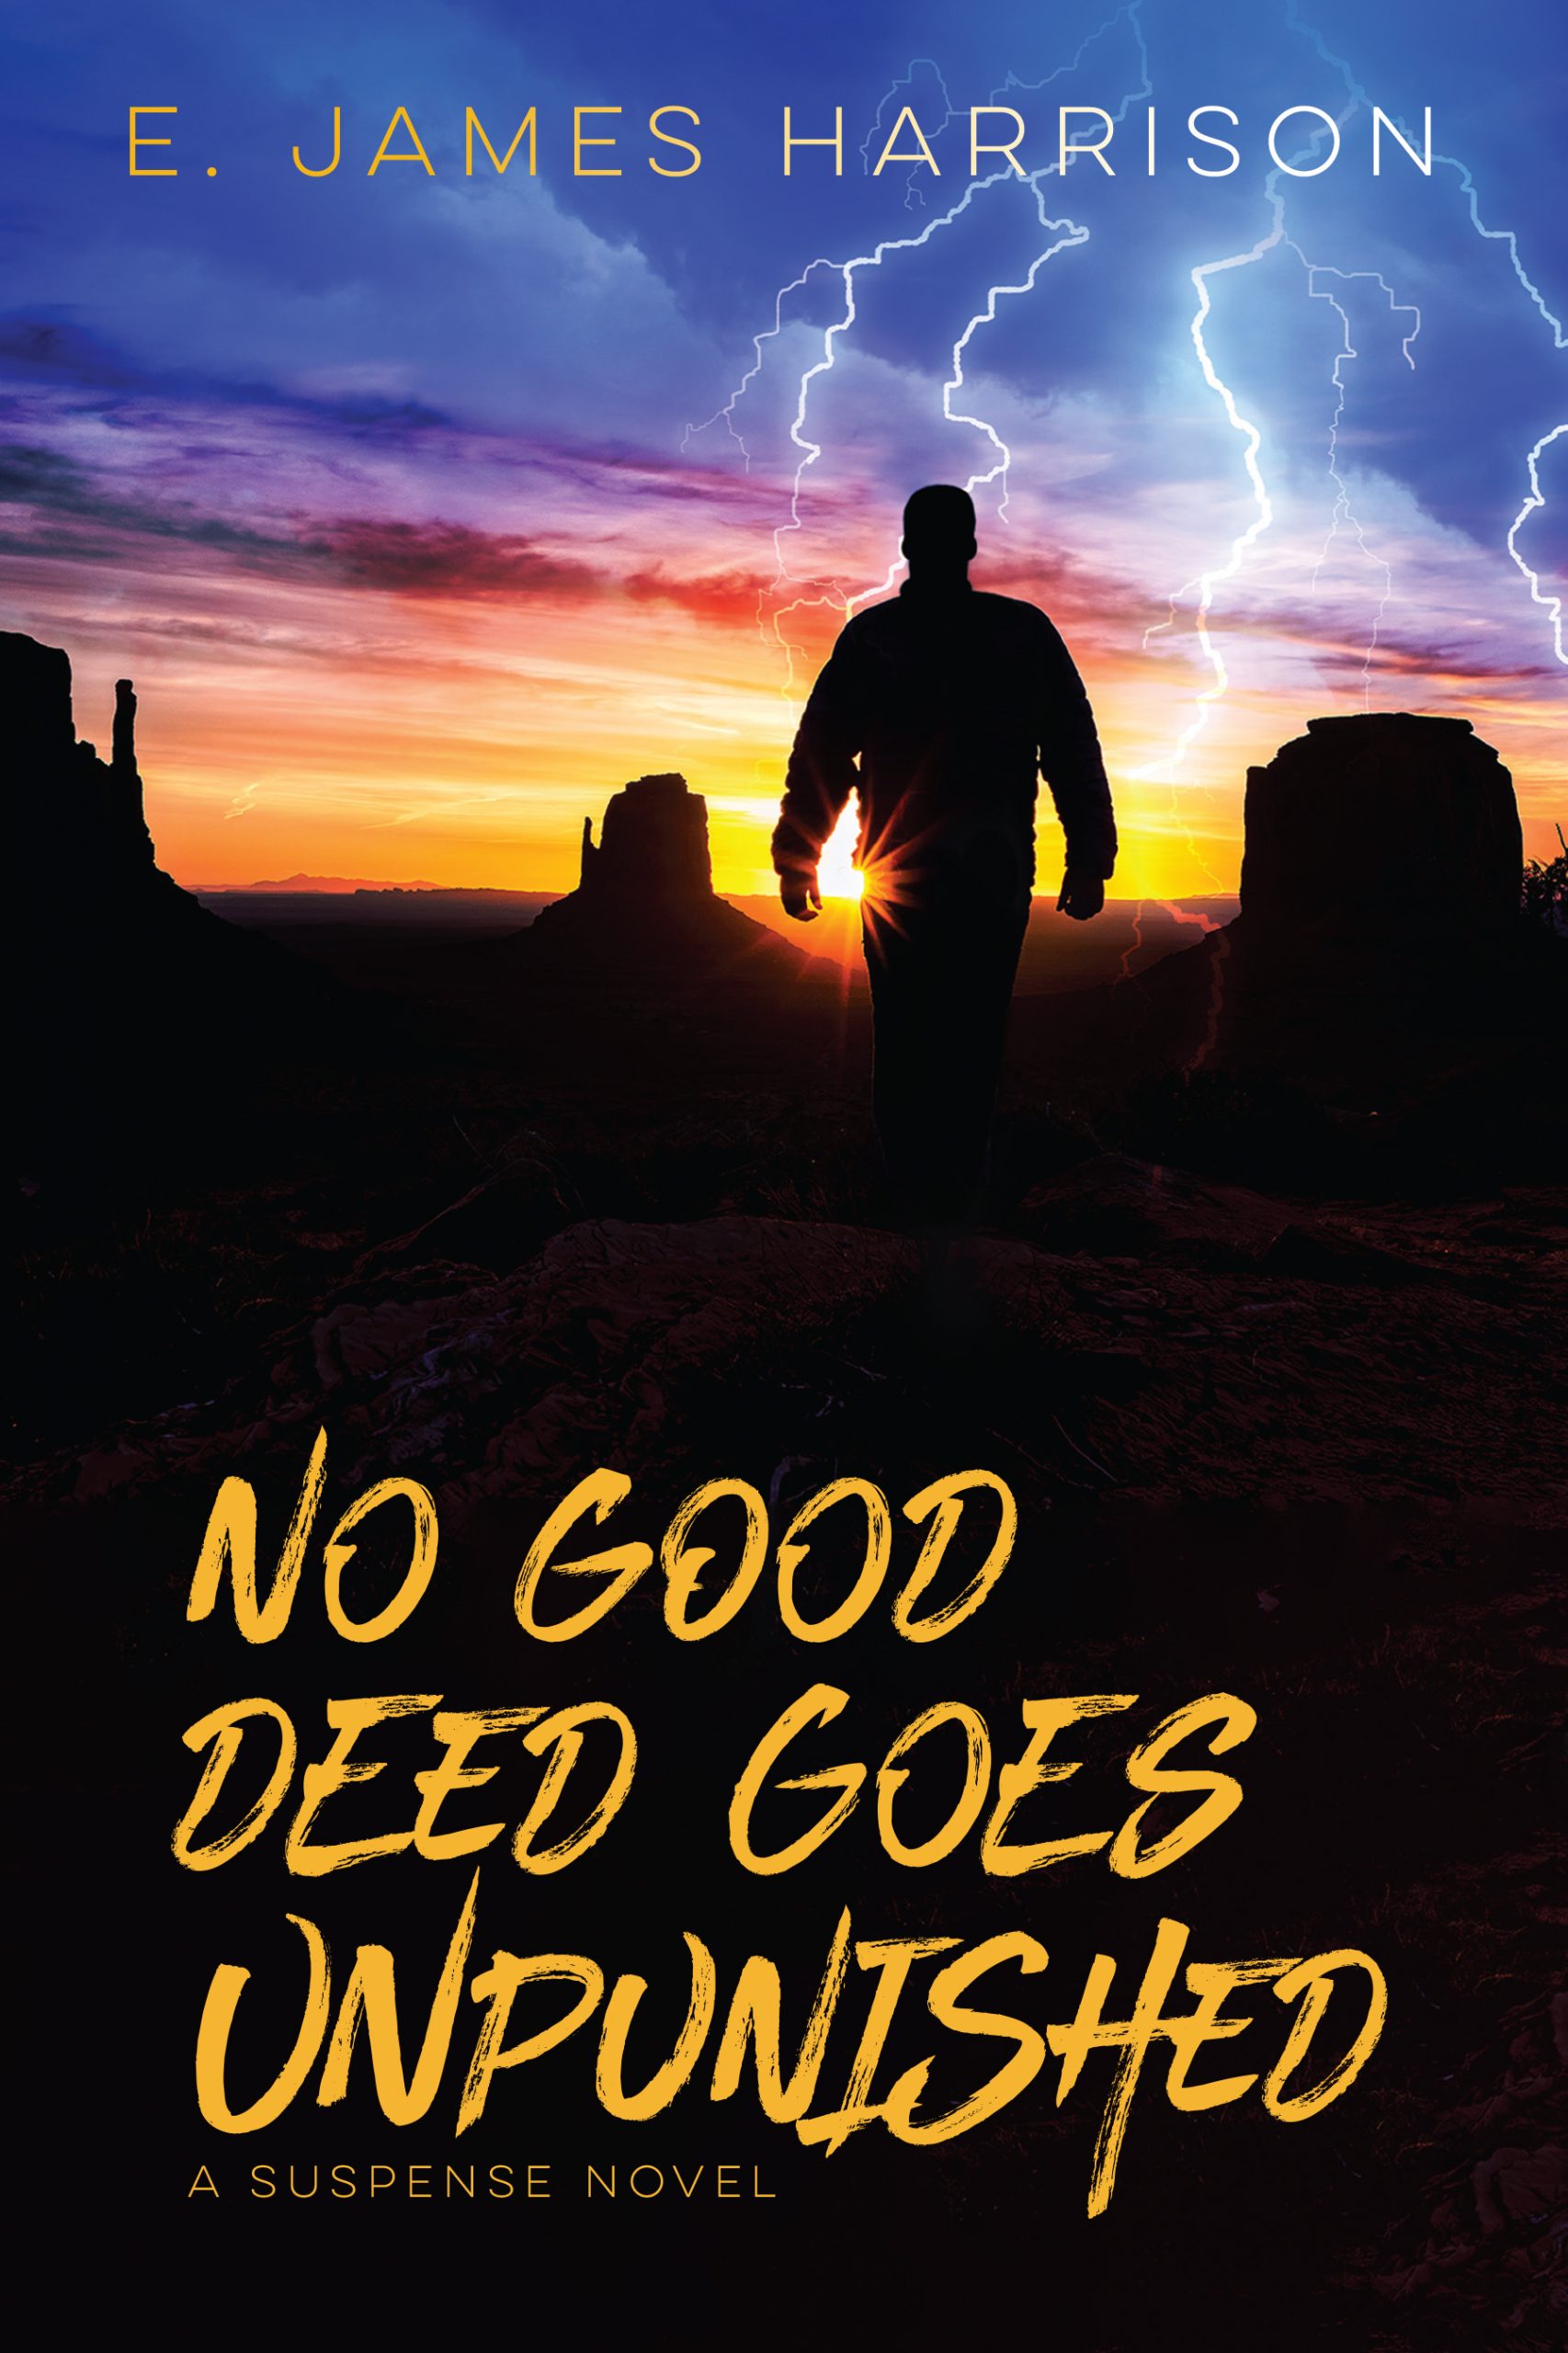 No Good Deed Goes Unpunished by E. James Harrison